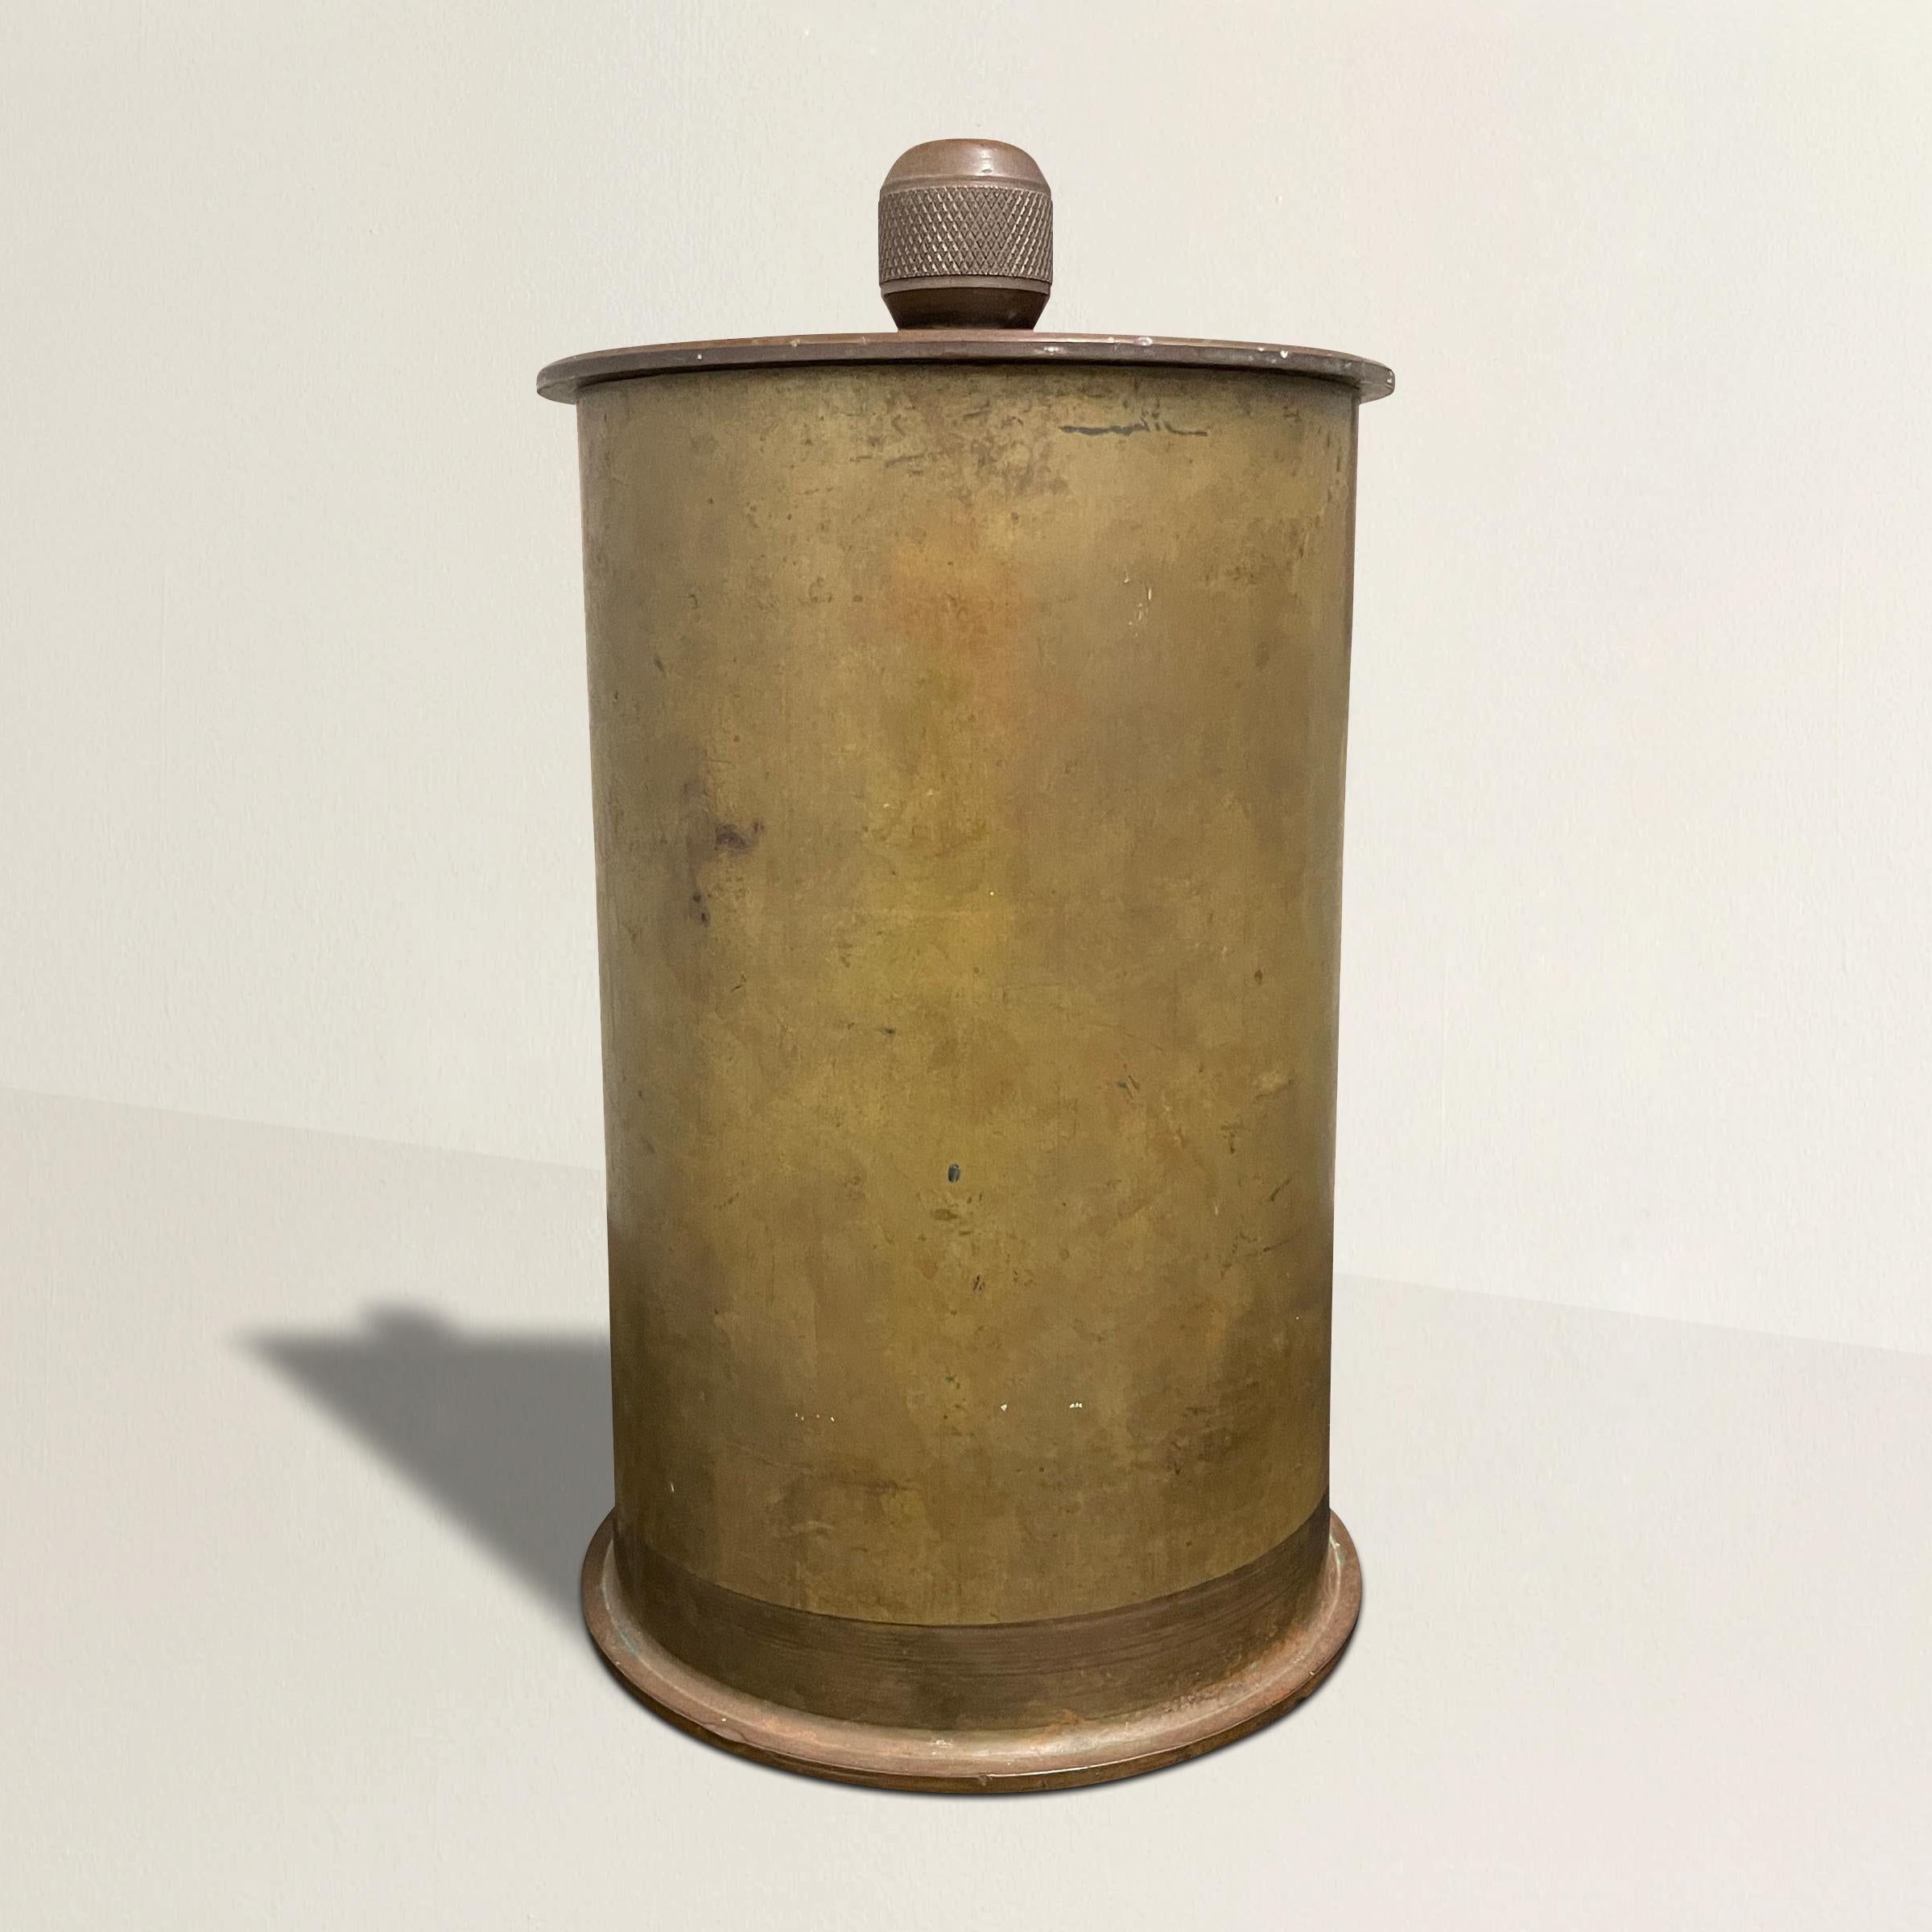 An incredible early 20th century American Trench Art bronze bank made from a spent artillery shell casing, and with a lid with a heavy knurled knob.